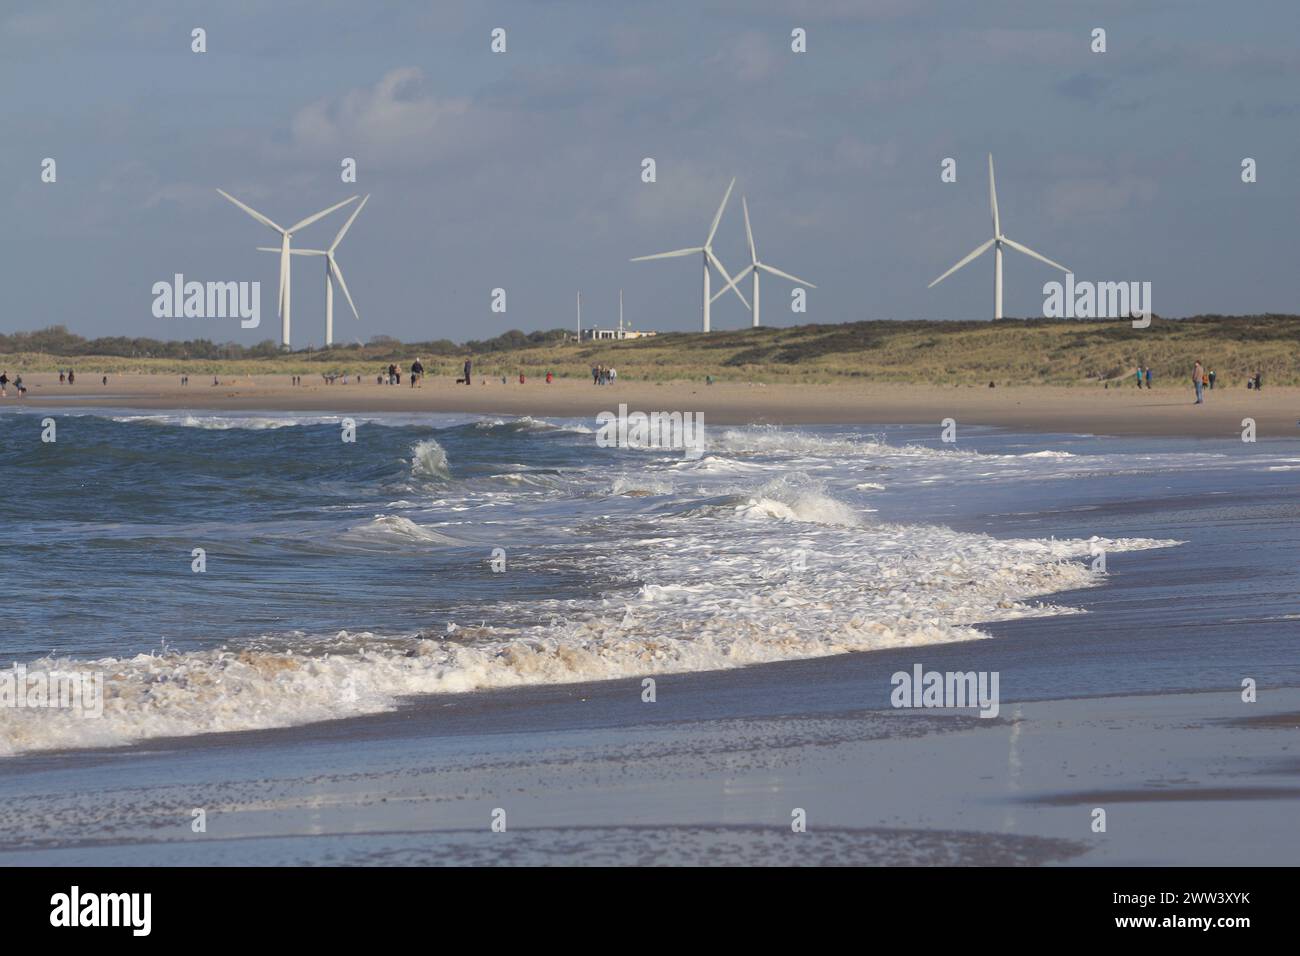 several wind turbines, with beach and the sea in the foreground Stock Photo